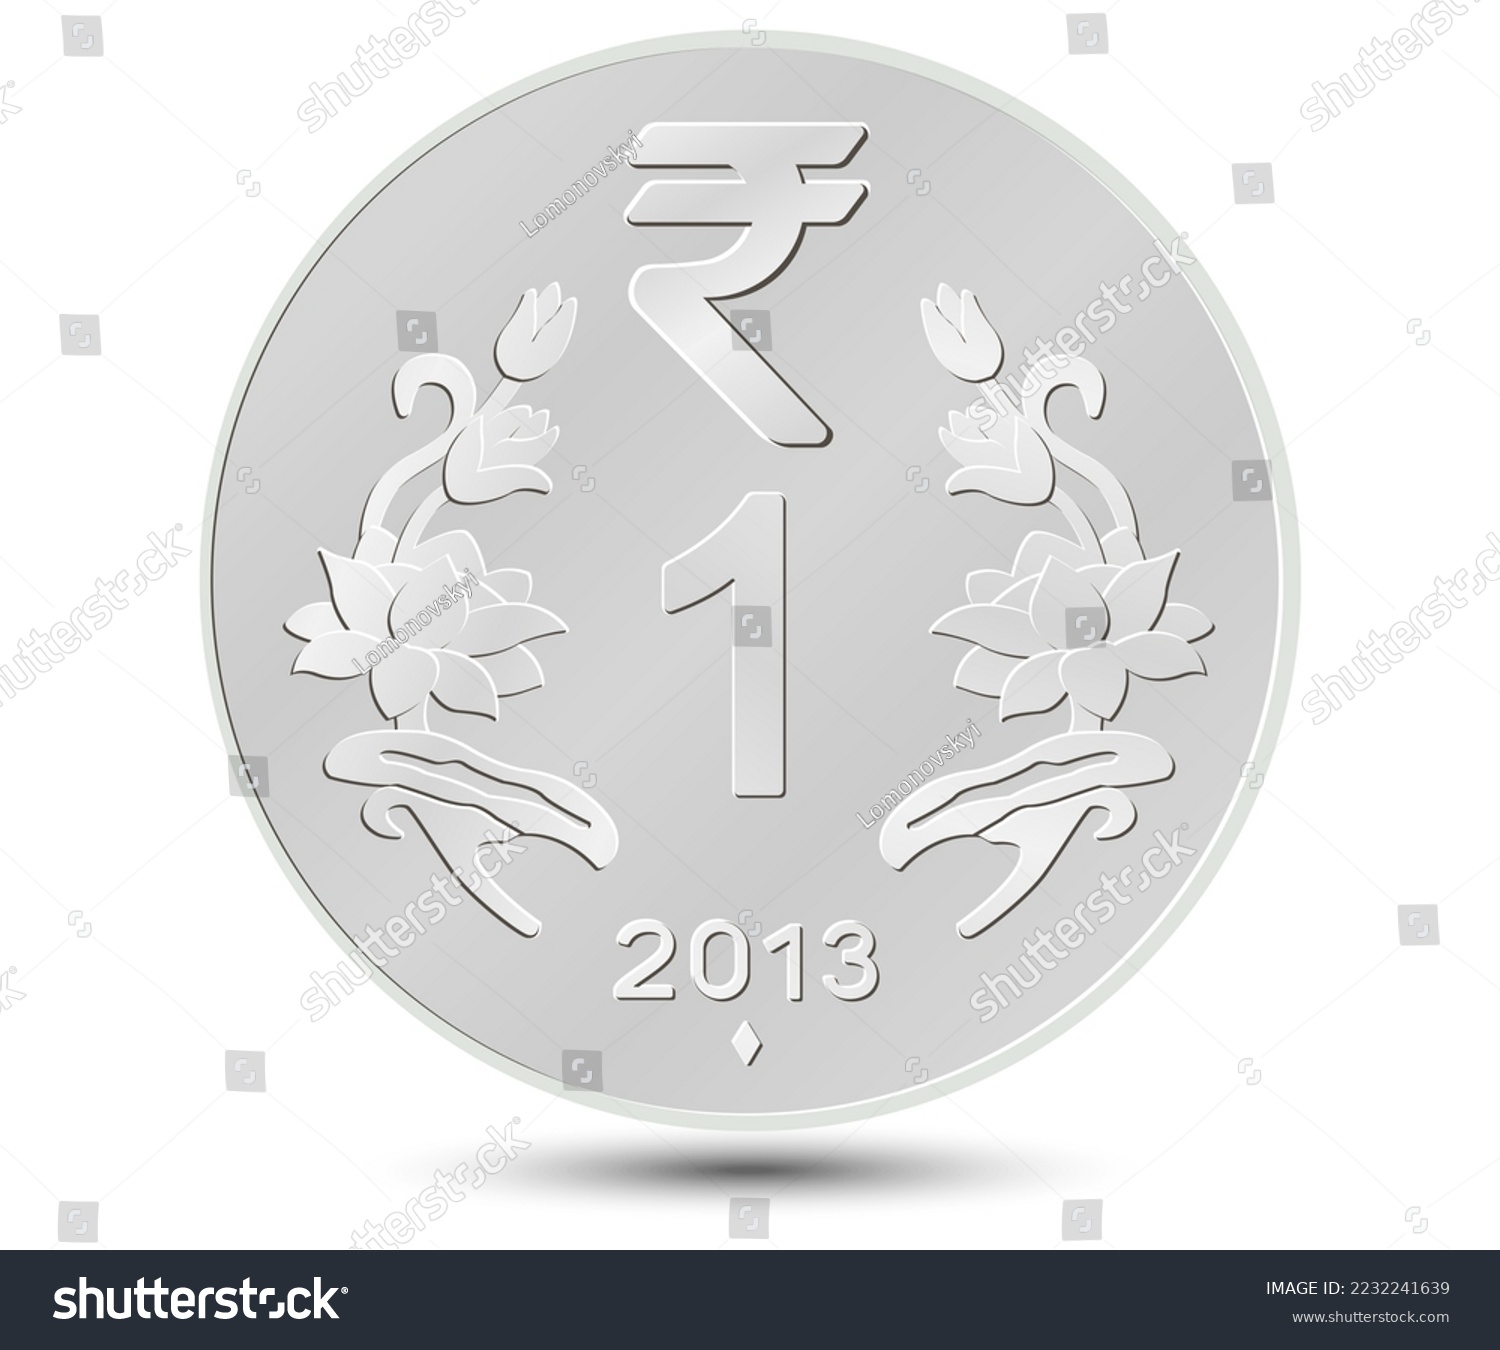 SVG of One Rupee coin of India, back side isolated on white background.	 svg